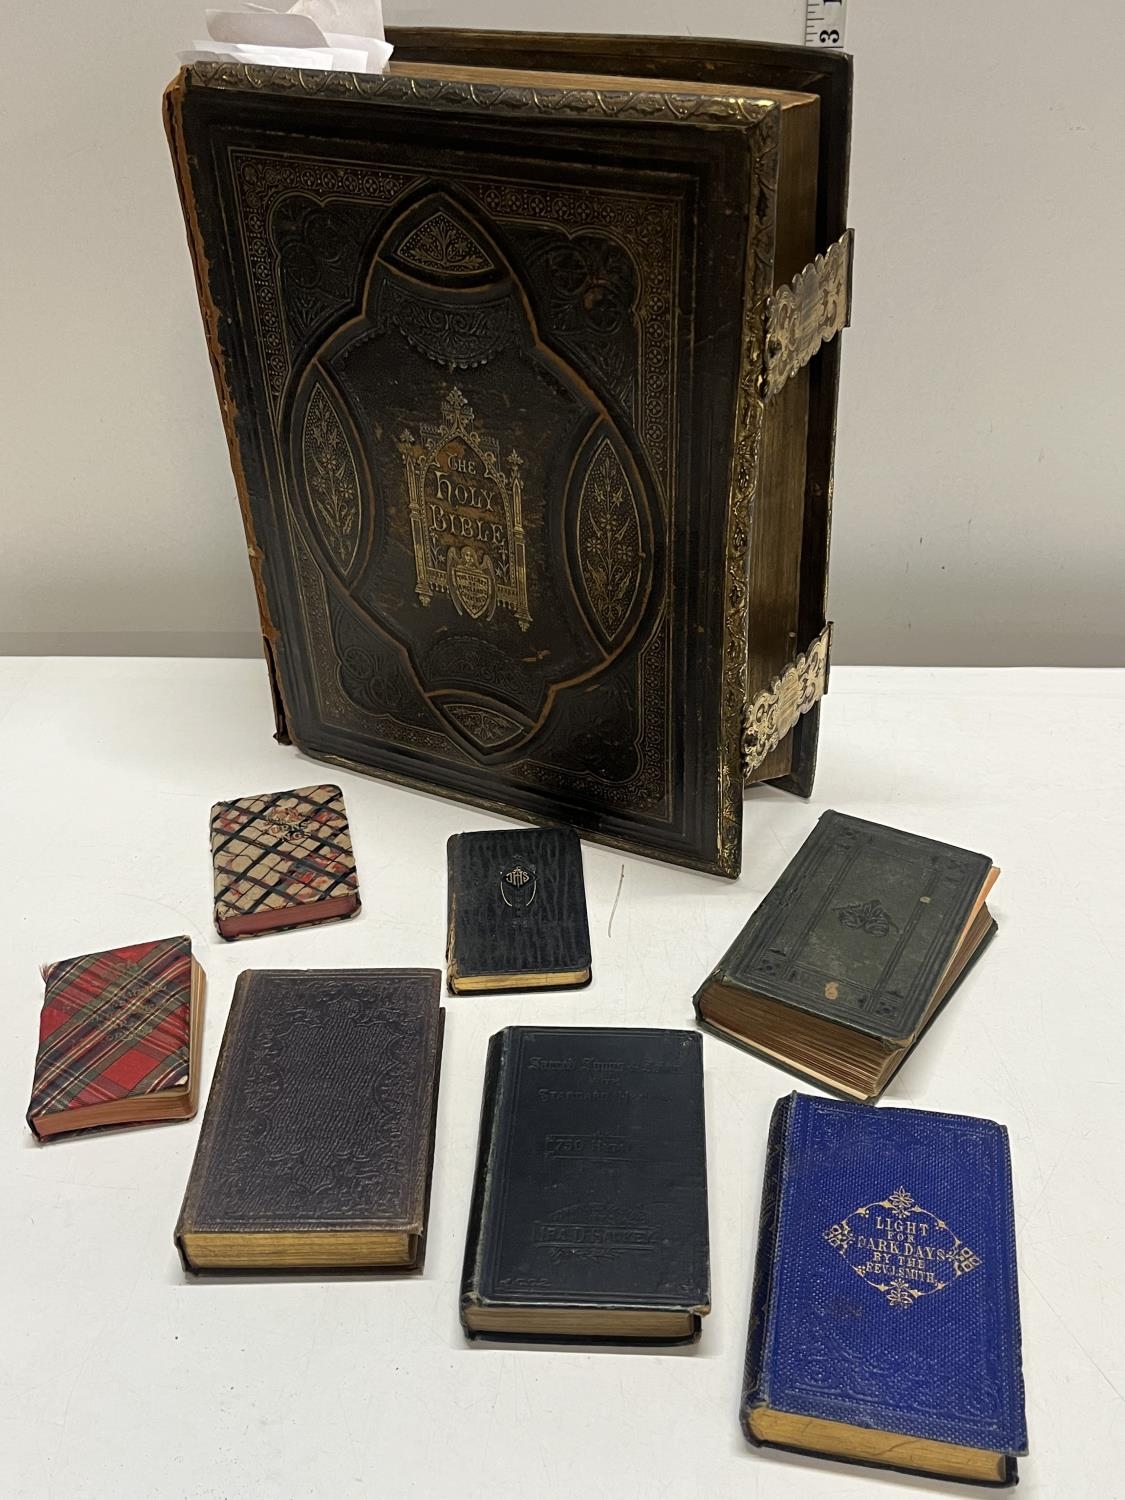 A antique Victoiran family bible with brass clasps a/f and other religious themed books